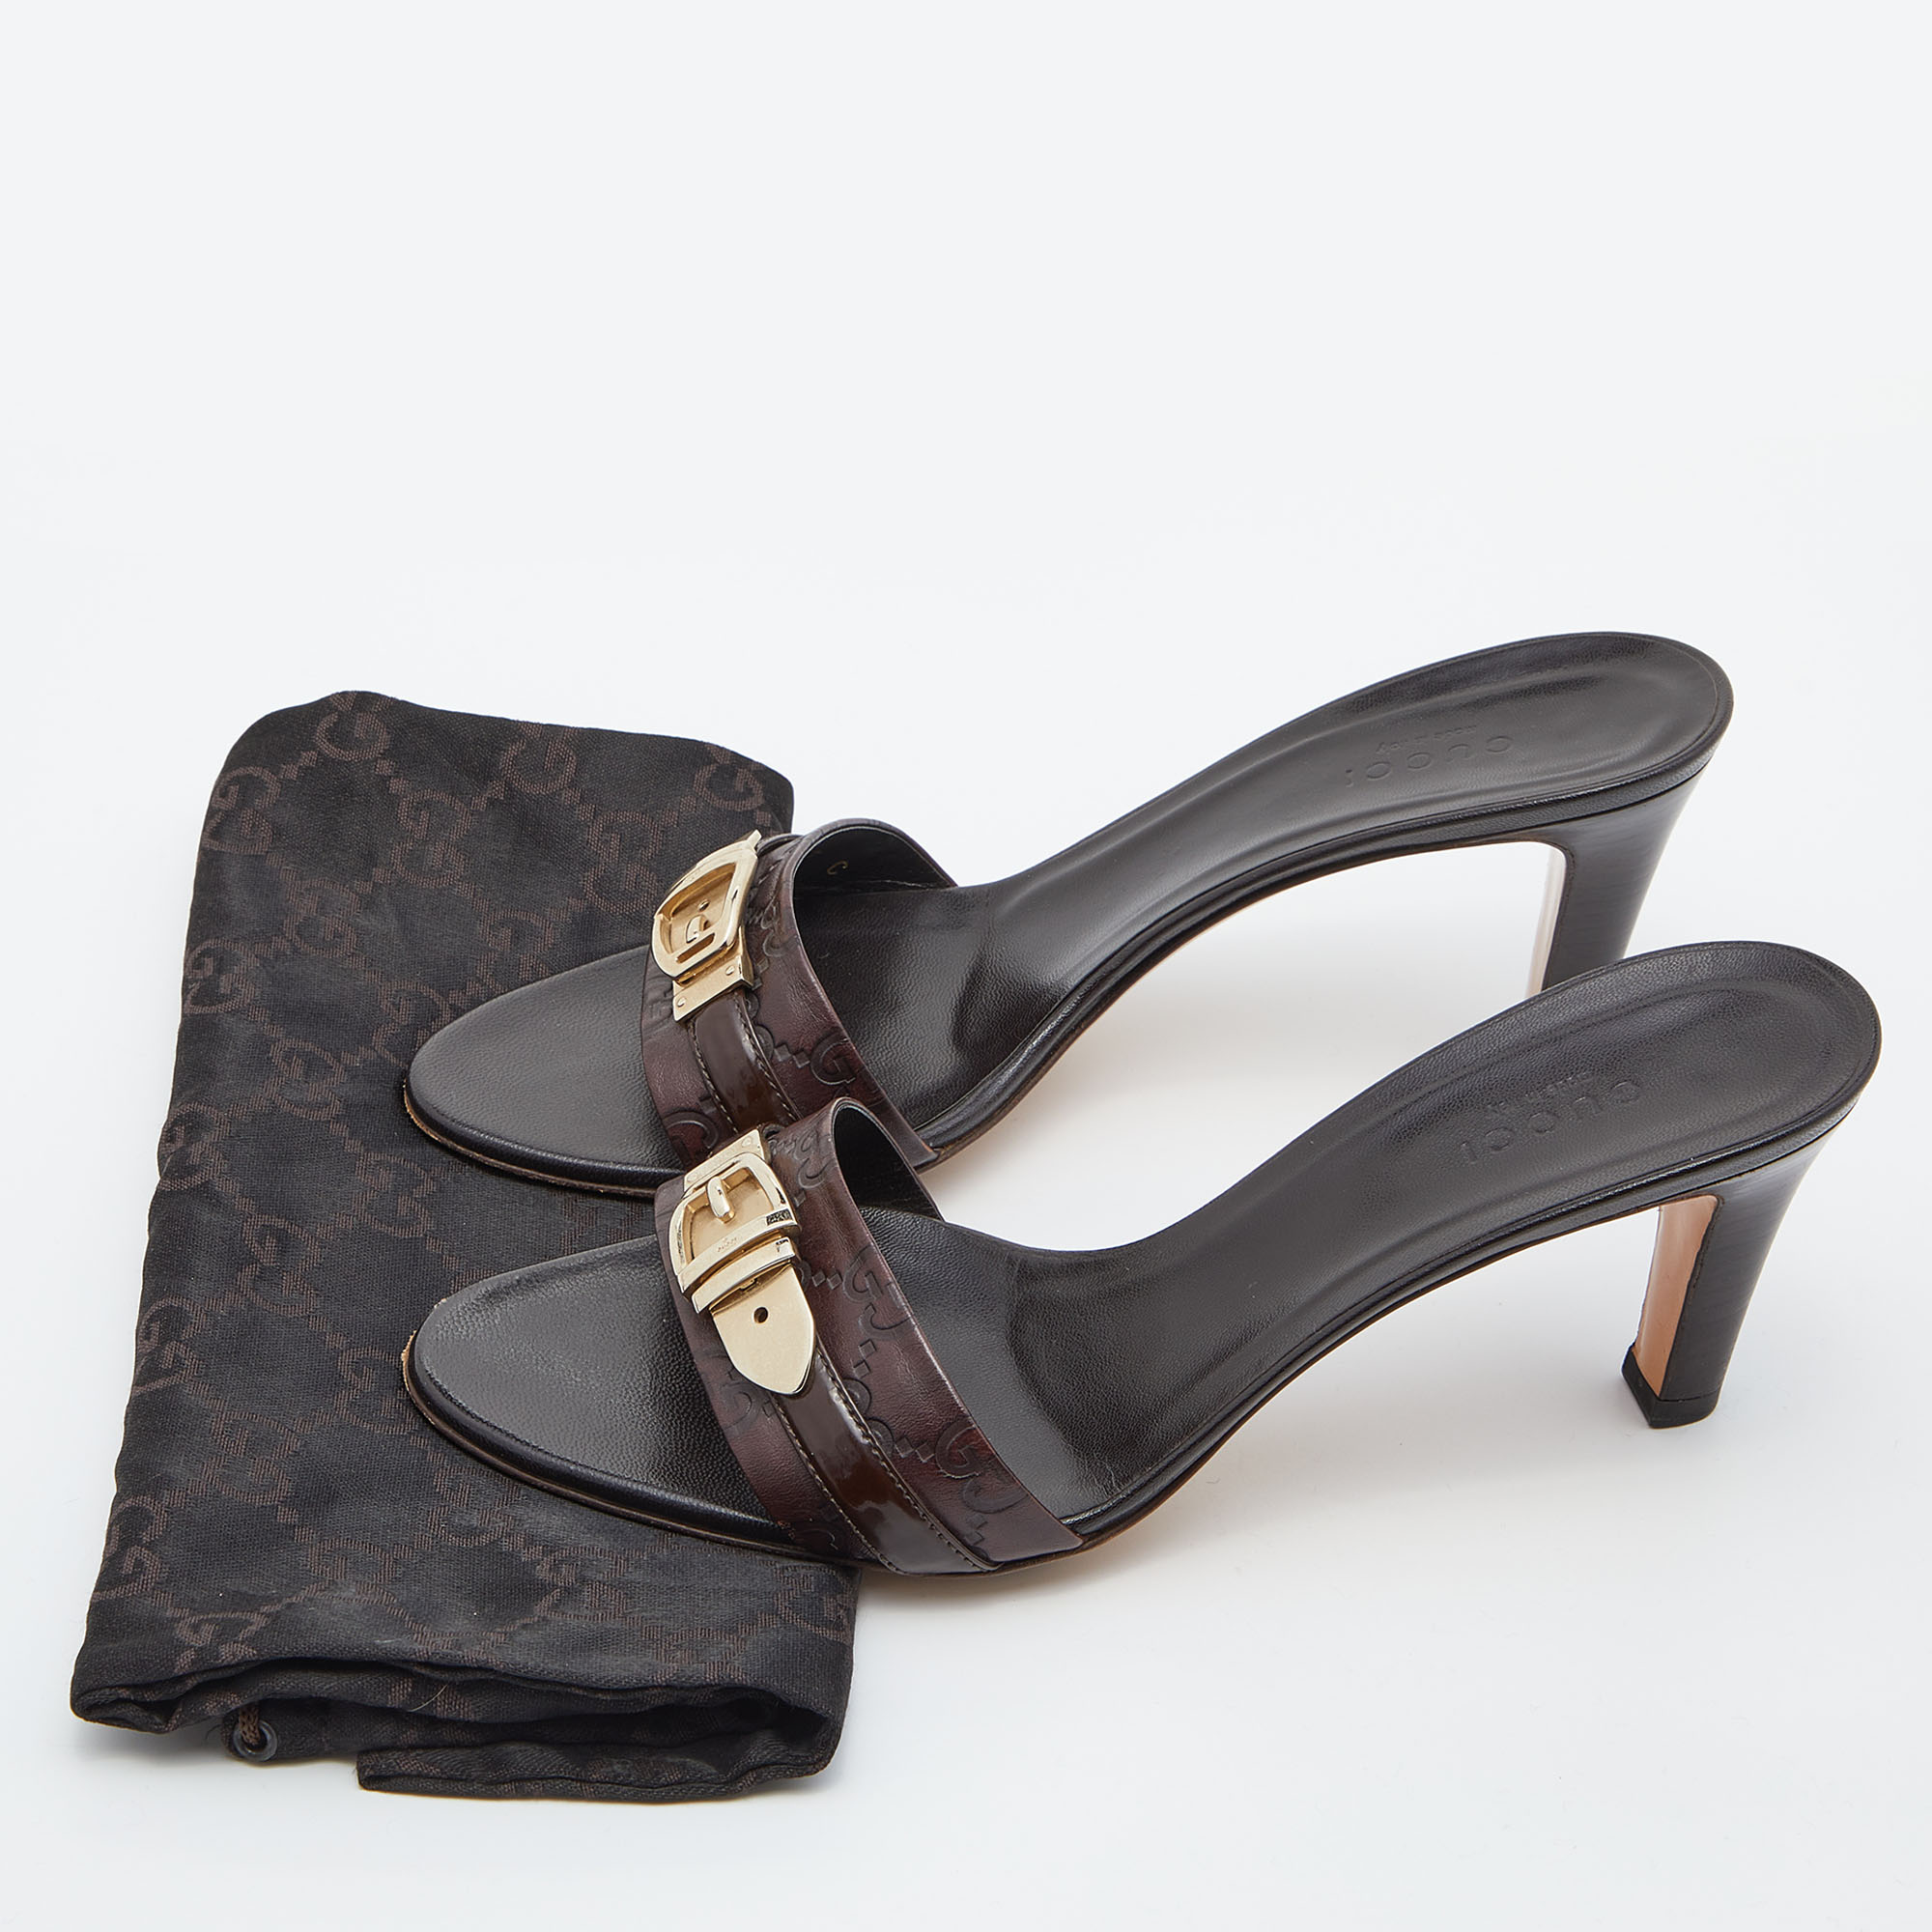 Gucci Brown Guccissima Leather Buckle Detail Slide Sandals Size 37